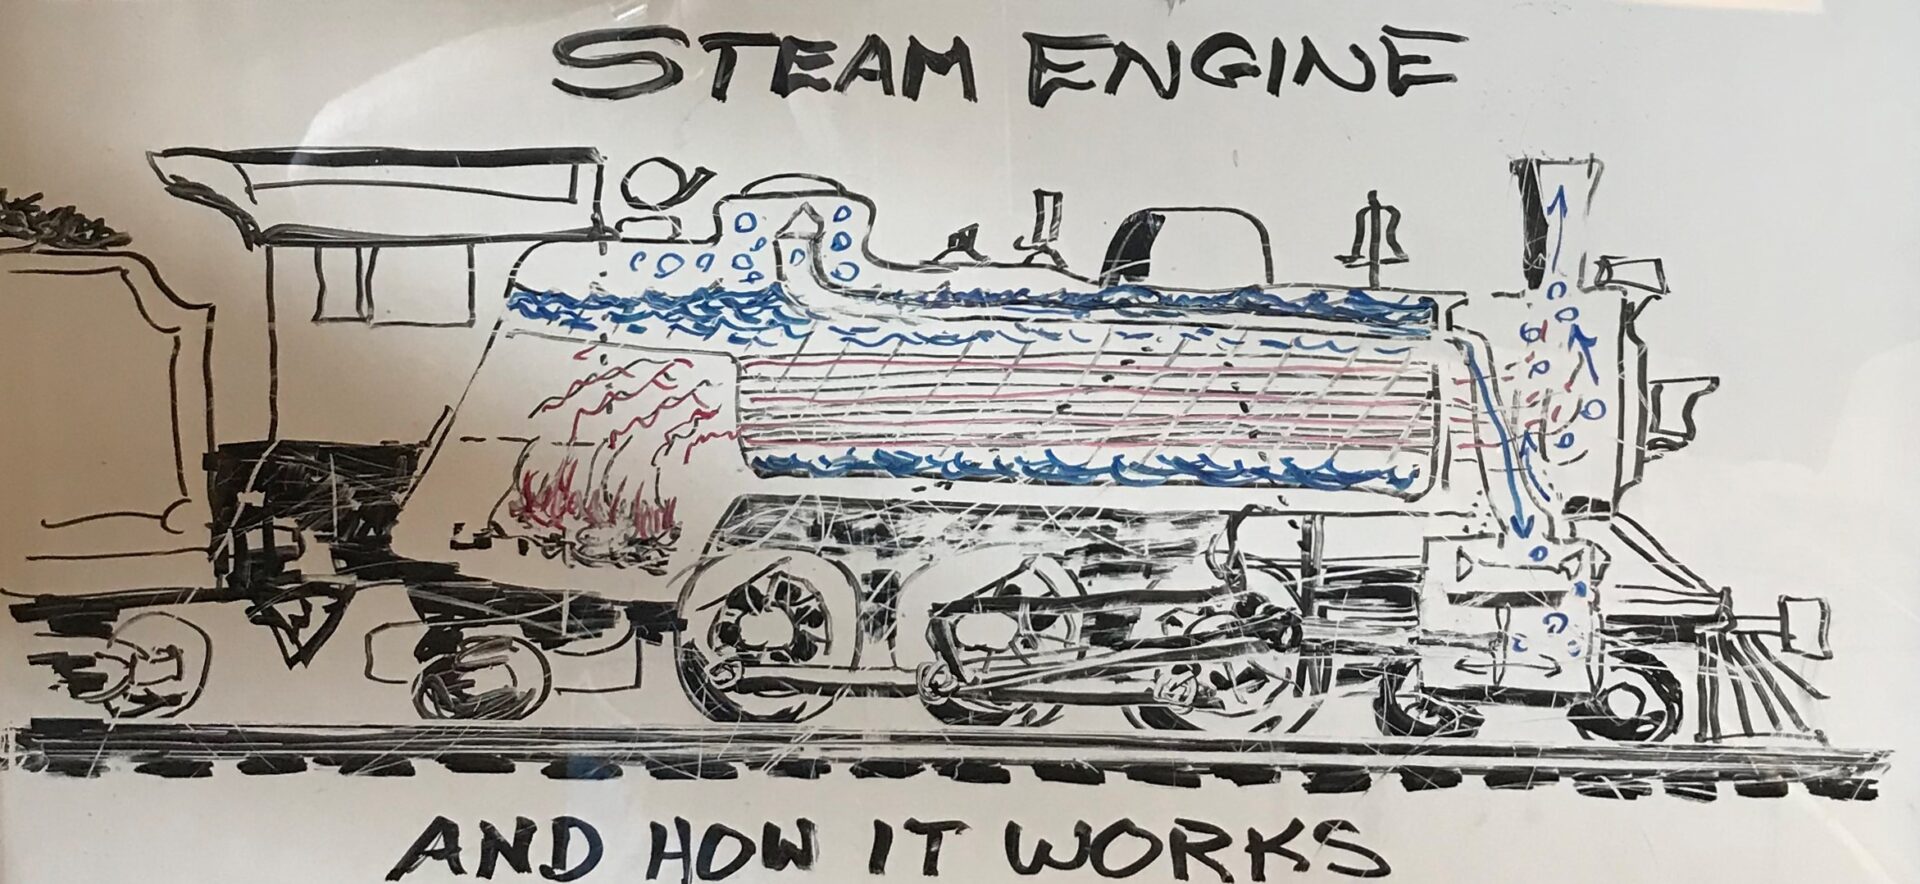 Whiteboard Notes-How Steam Engine Works